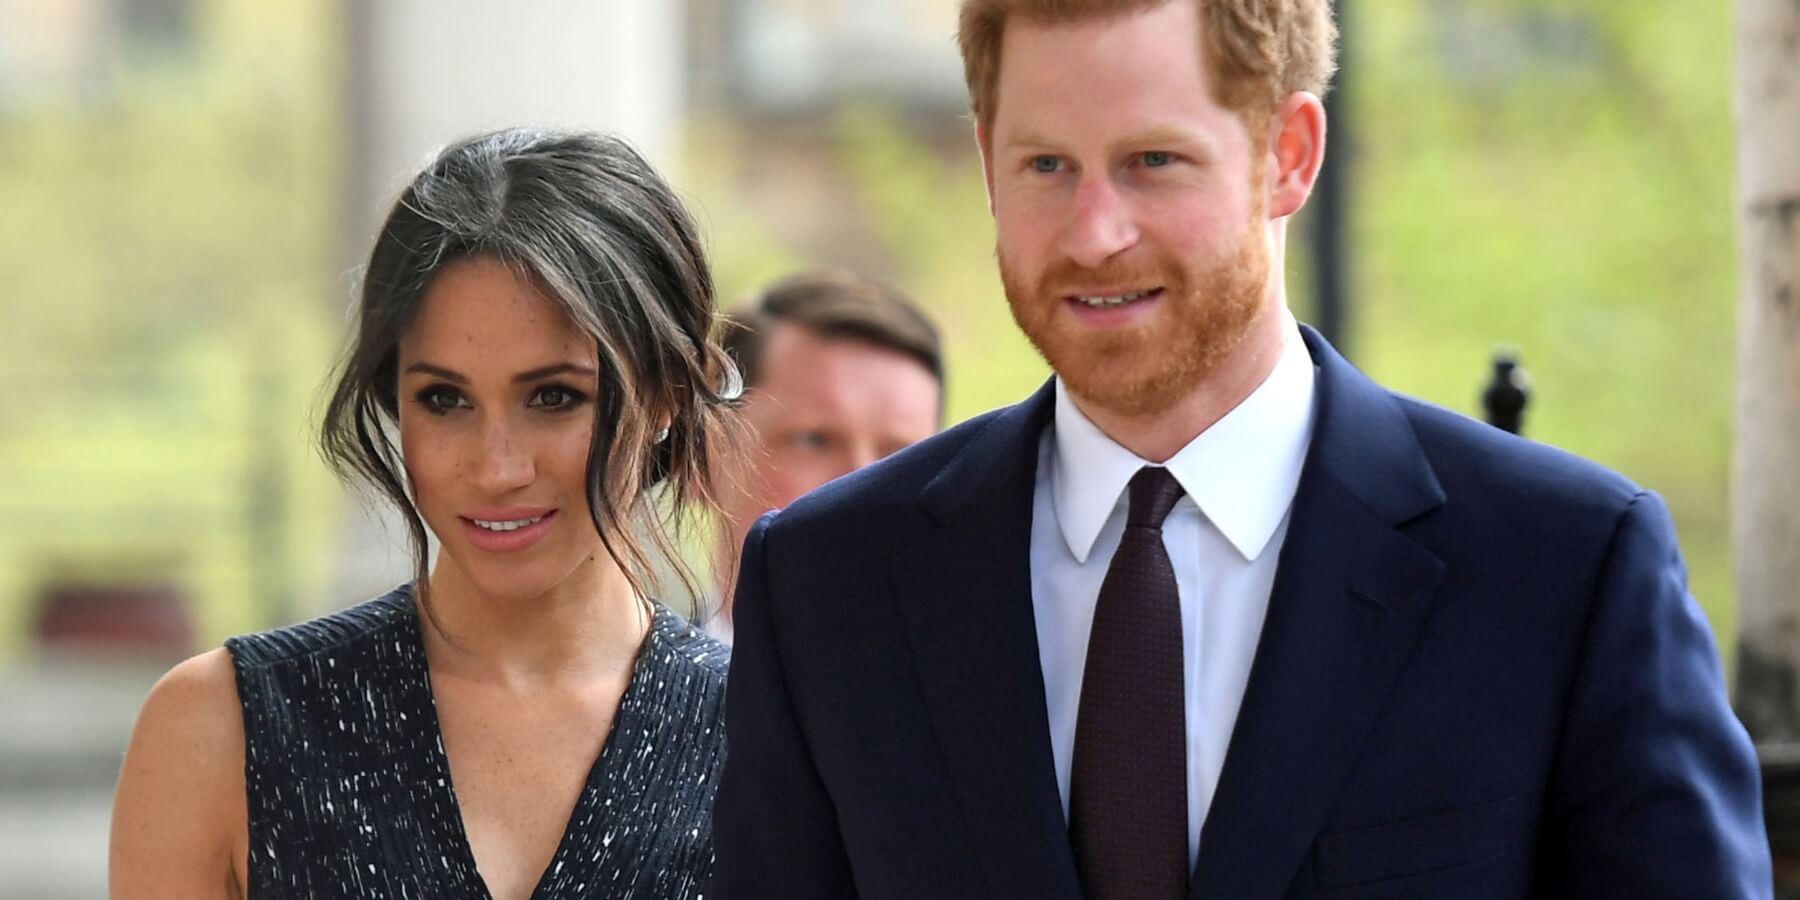 Meghan Markle and Prince Harry are photographed attending a memorial service at St Martin-in-the-Fields in Trafalgar Square in London, on April 23, 2018.